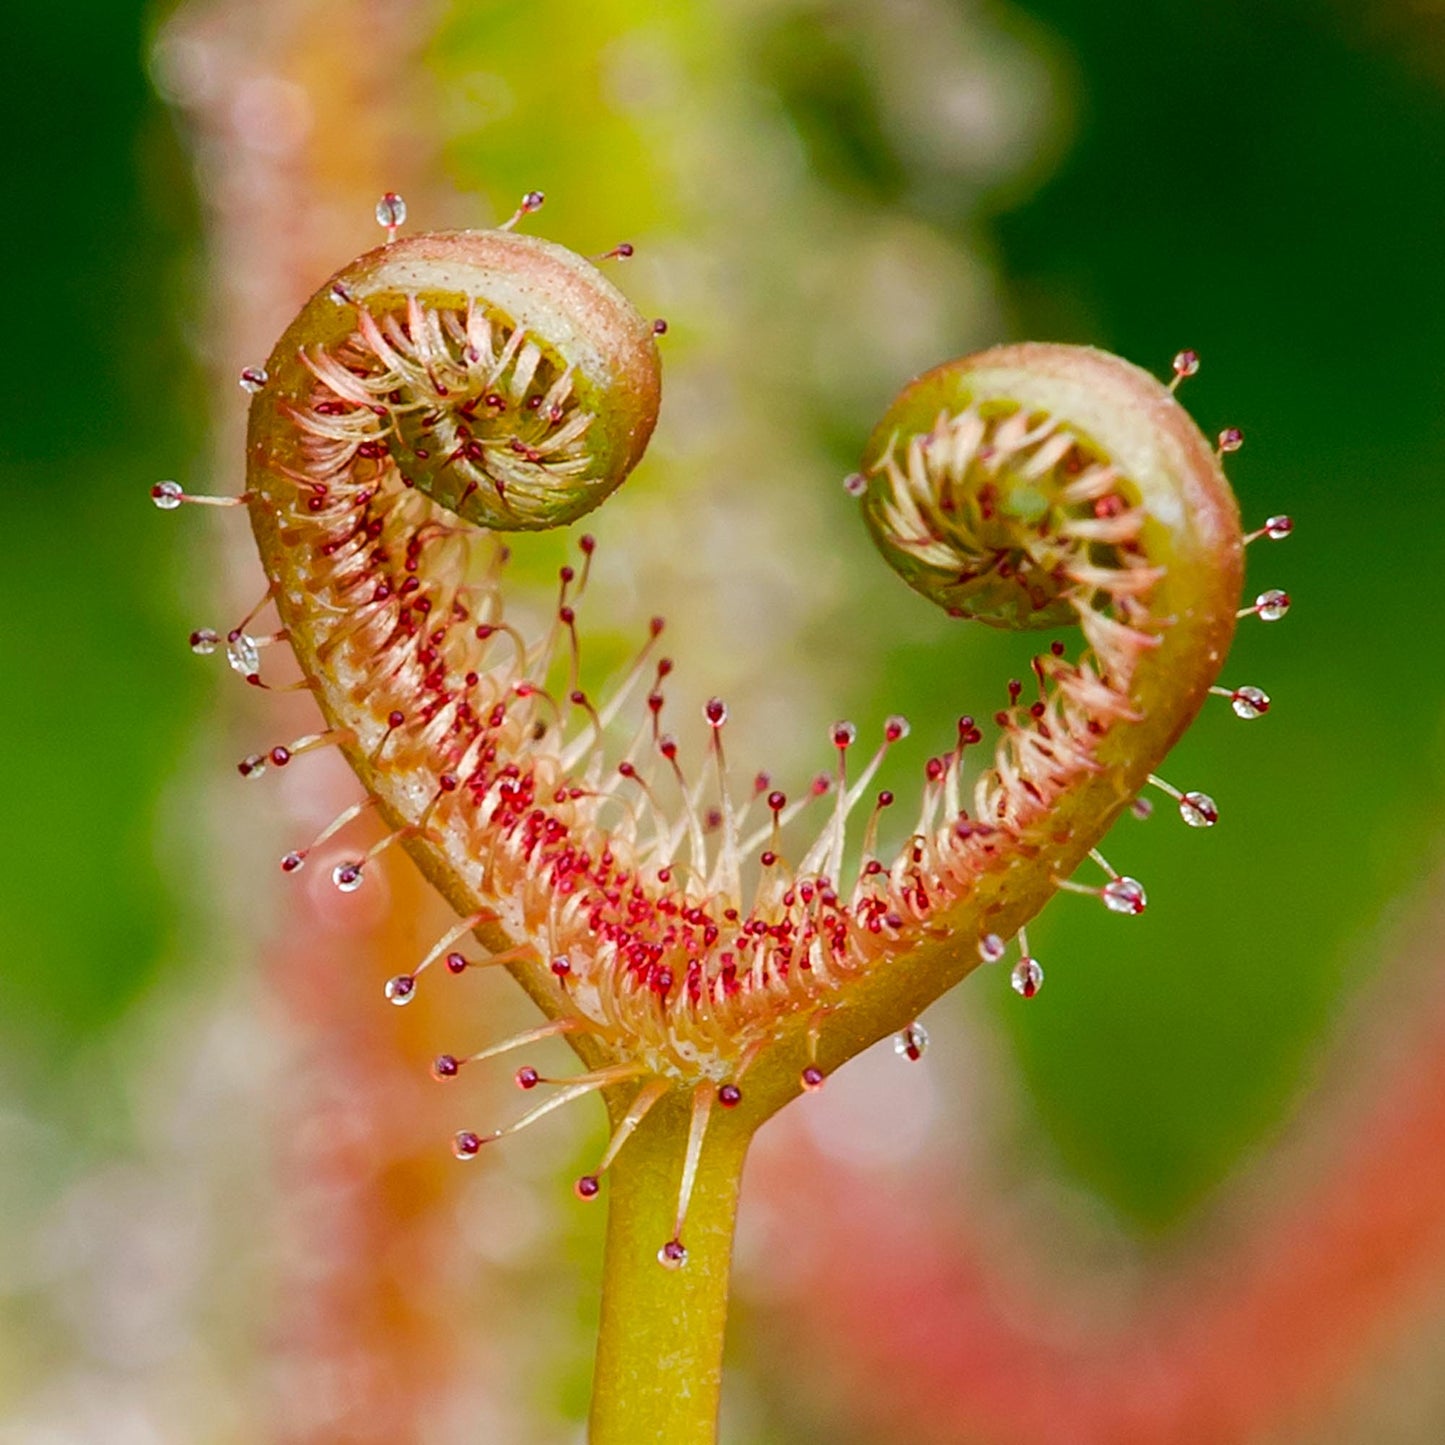 Drosera heart Flower photography greetings cards and gift boxes in the Garden Photography Gallery photography by Stephen Studd photographer